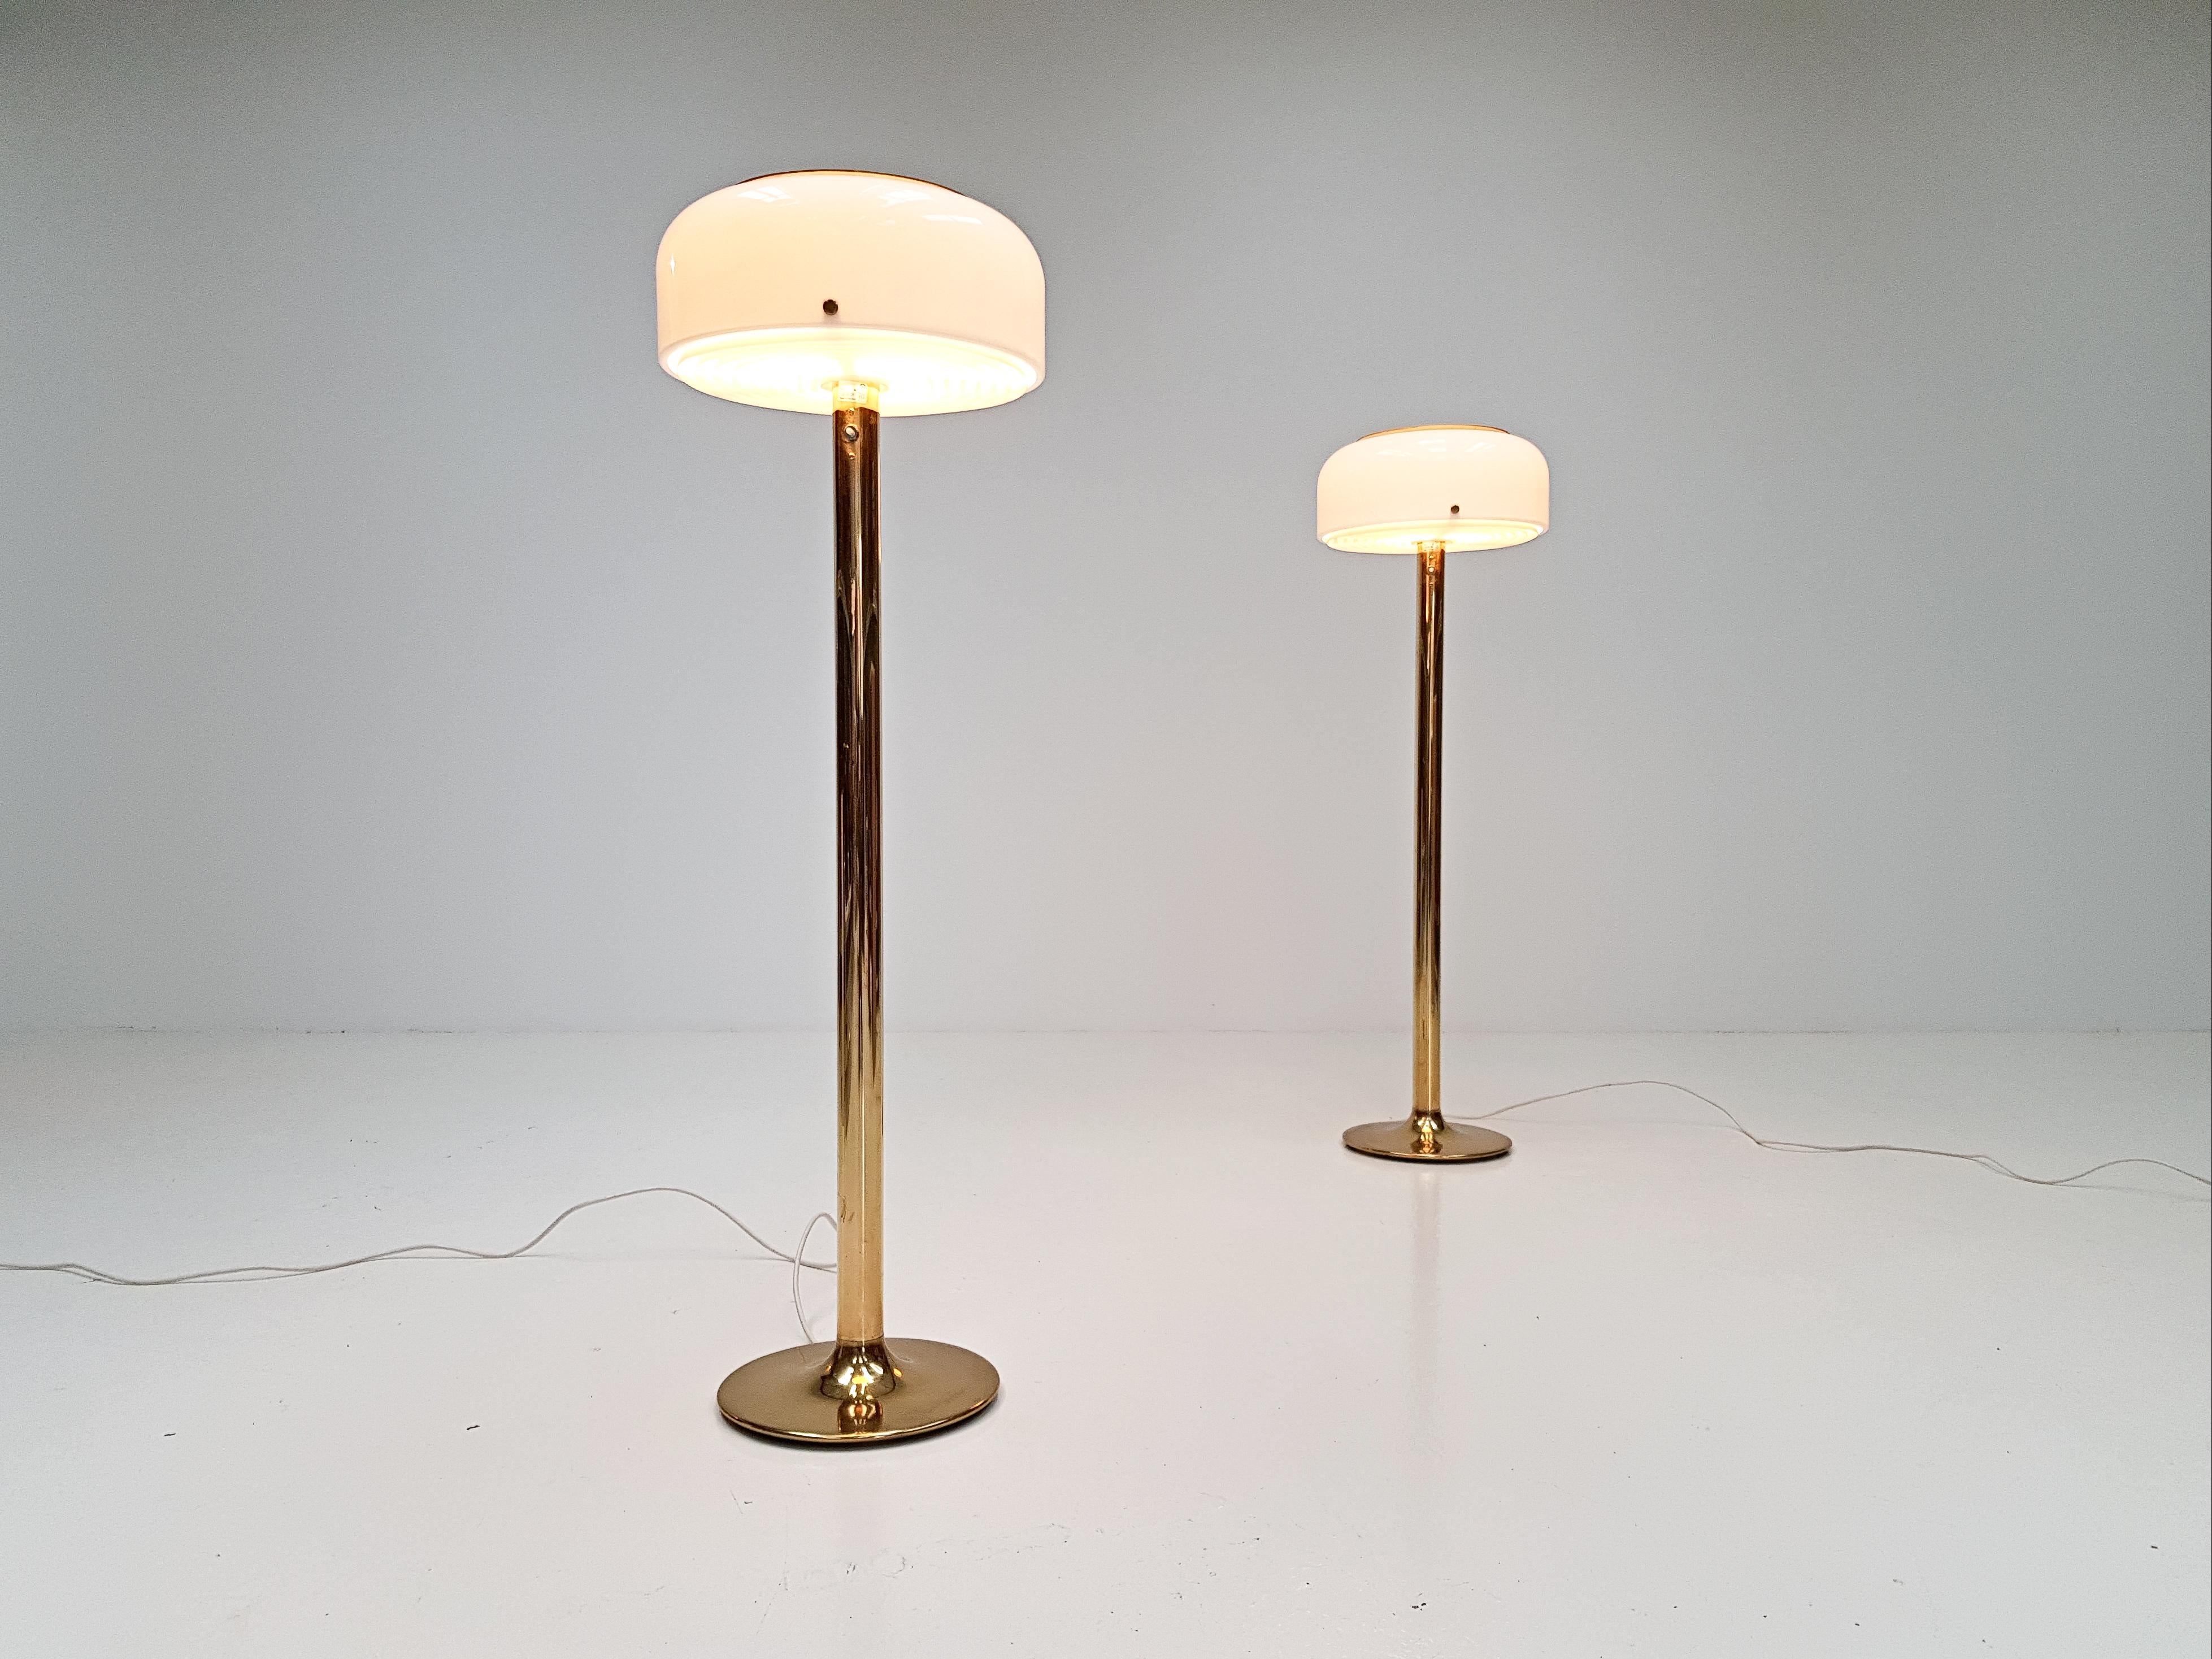 A pair of Knubbling floor lamps by Anders Pehrson for Ateljé Lyktan.

Striking brass stemmed floor lamps designed by Anders Pehrson and produced by Atelje Lyktan, Sweden, 1970s,

The base sits on four small plastic knobs, which makes the lamps